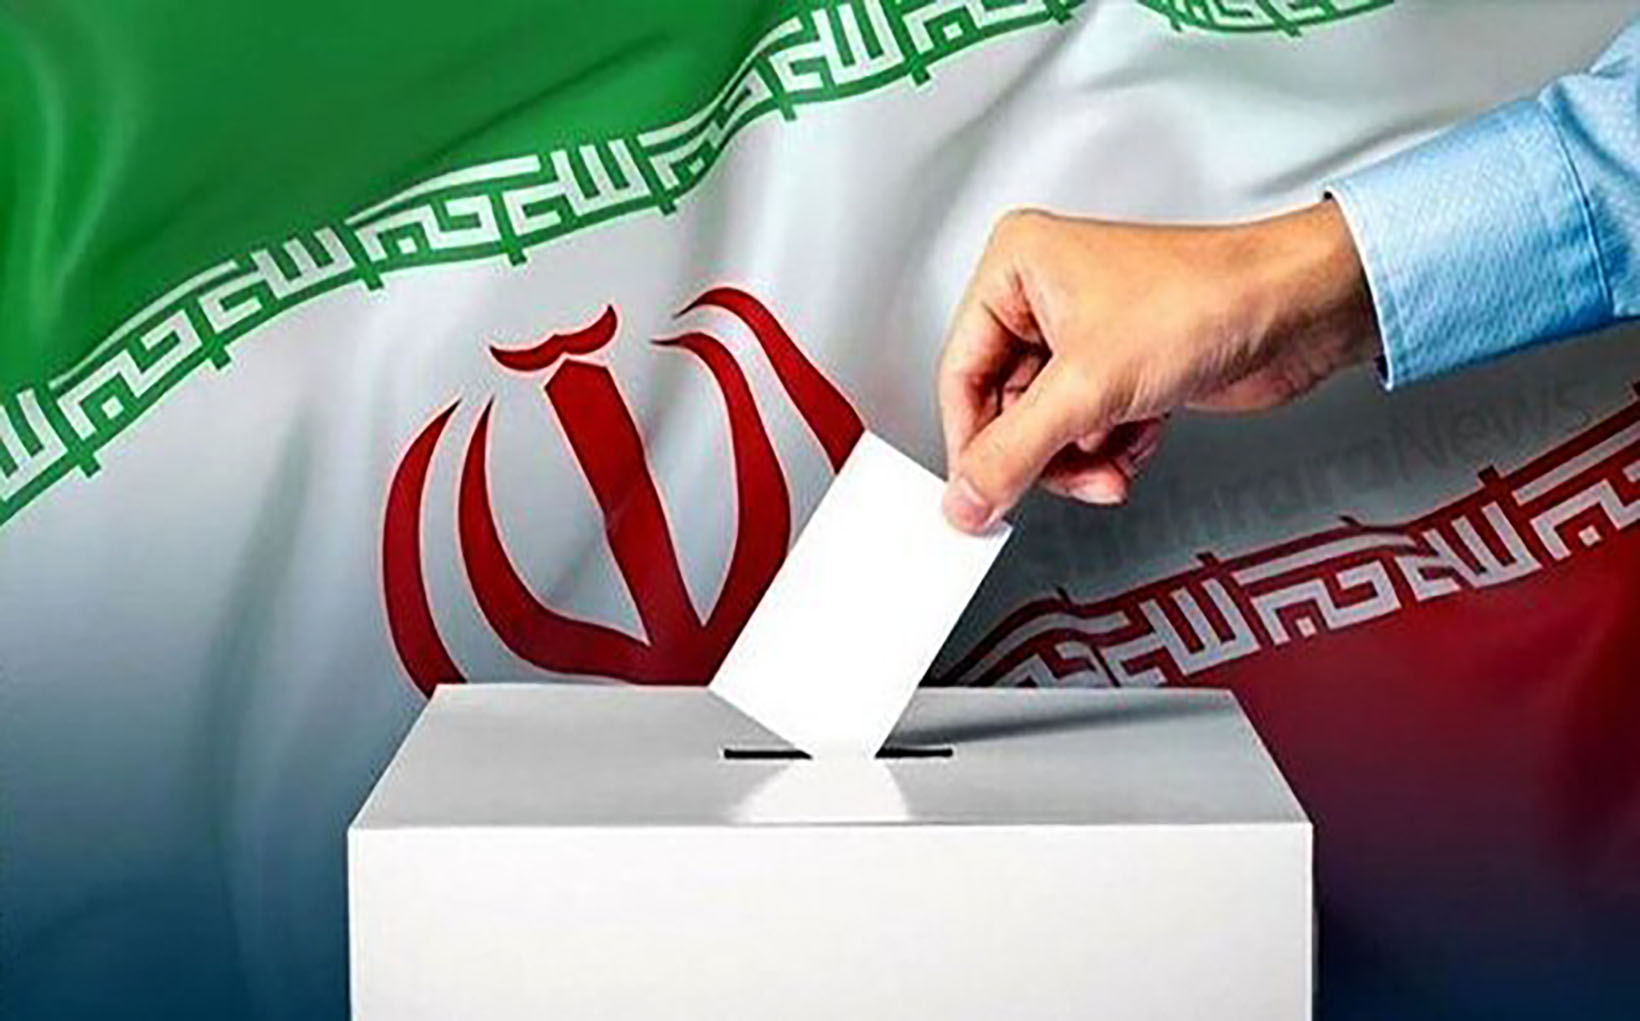 Screening Process Begins for Iran Presidential Candidates